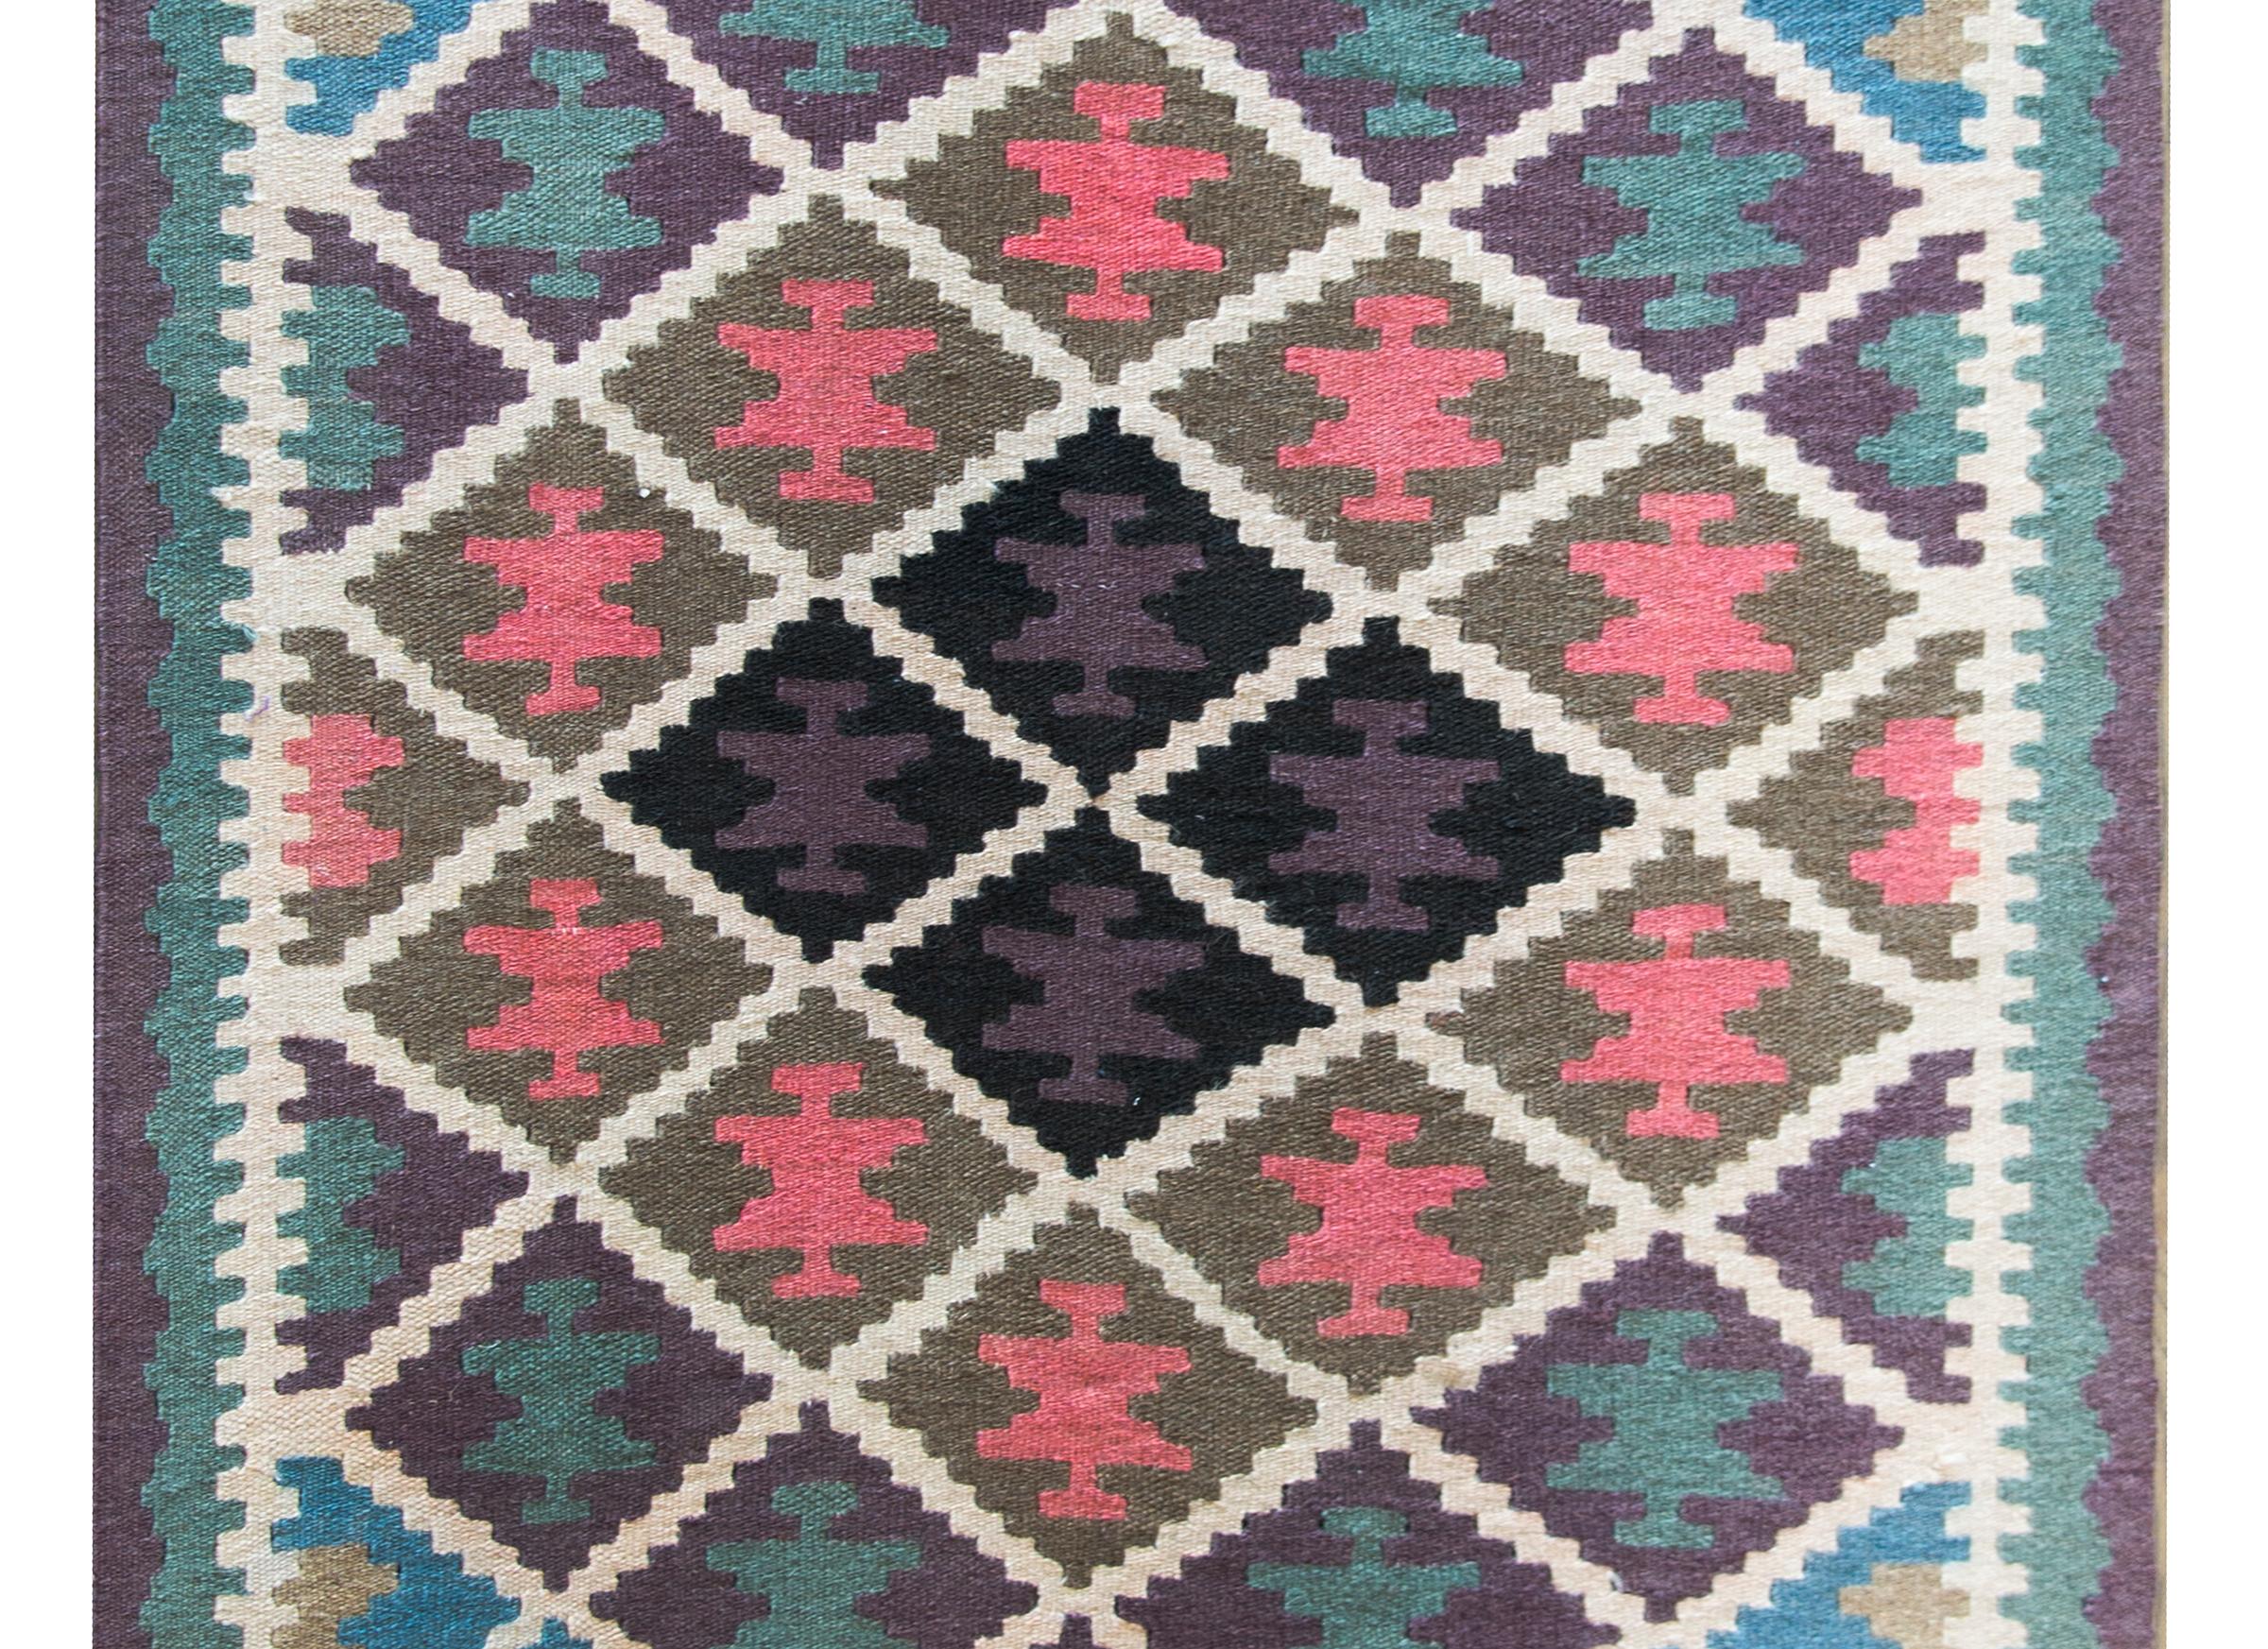 A wonderful mid-20th century Afghani kilim rug with an all-over diamond pattern, each with a stylized flower, and woven in brilliant pinks, indigos, golds, teals, and violets.